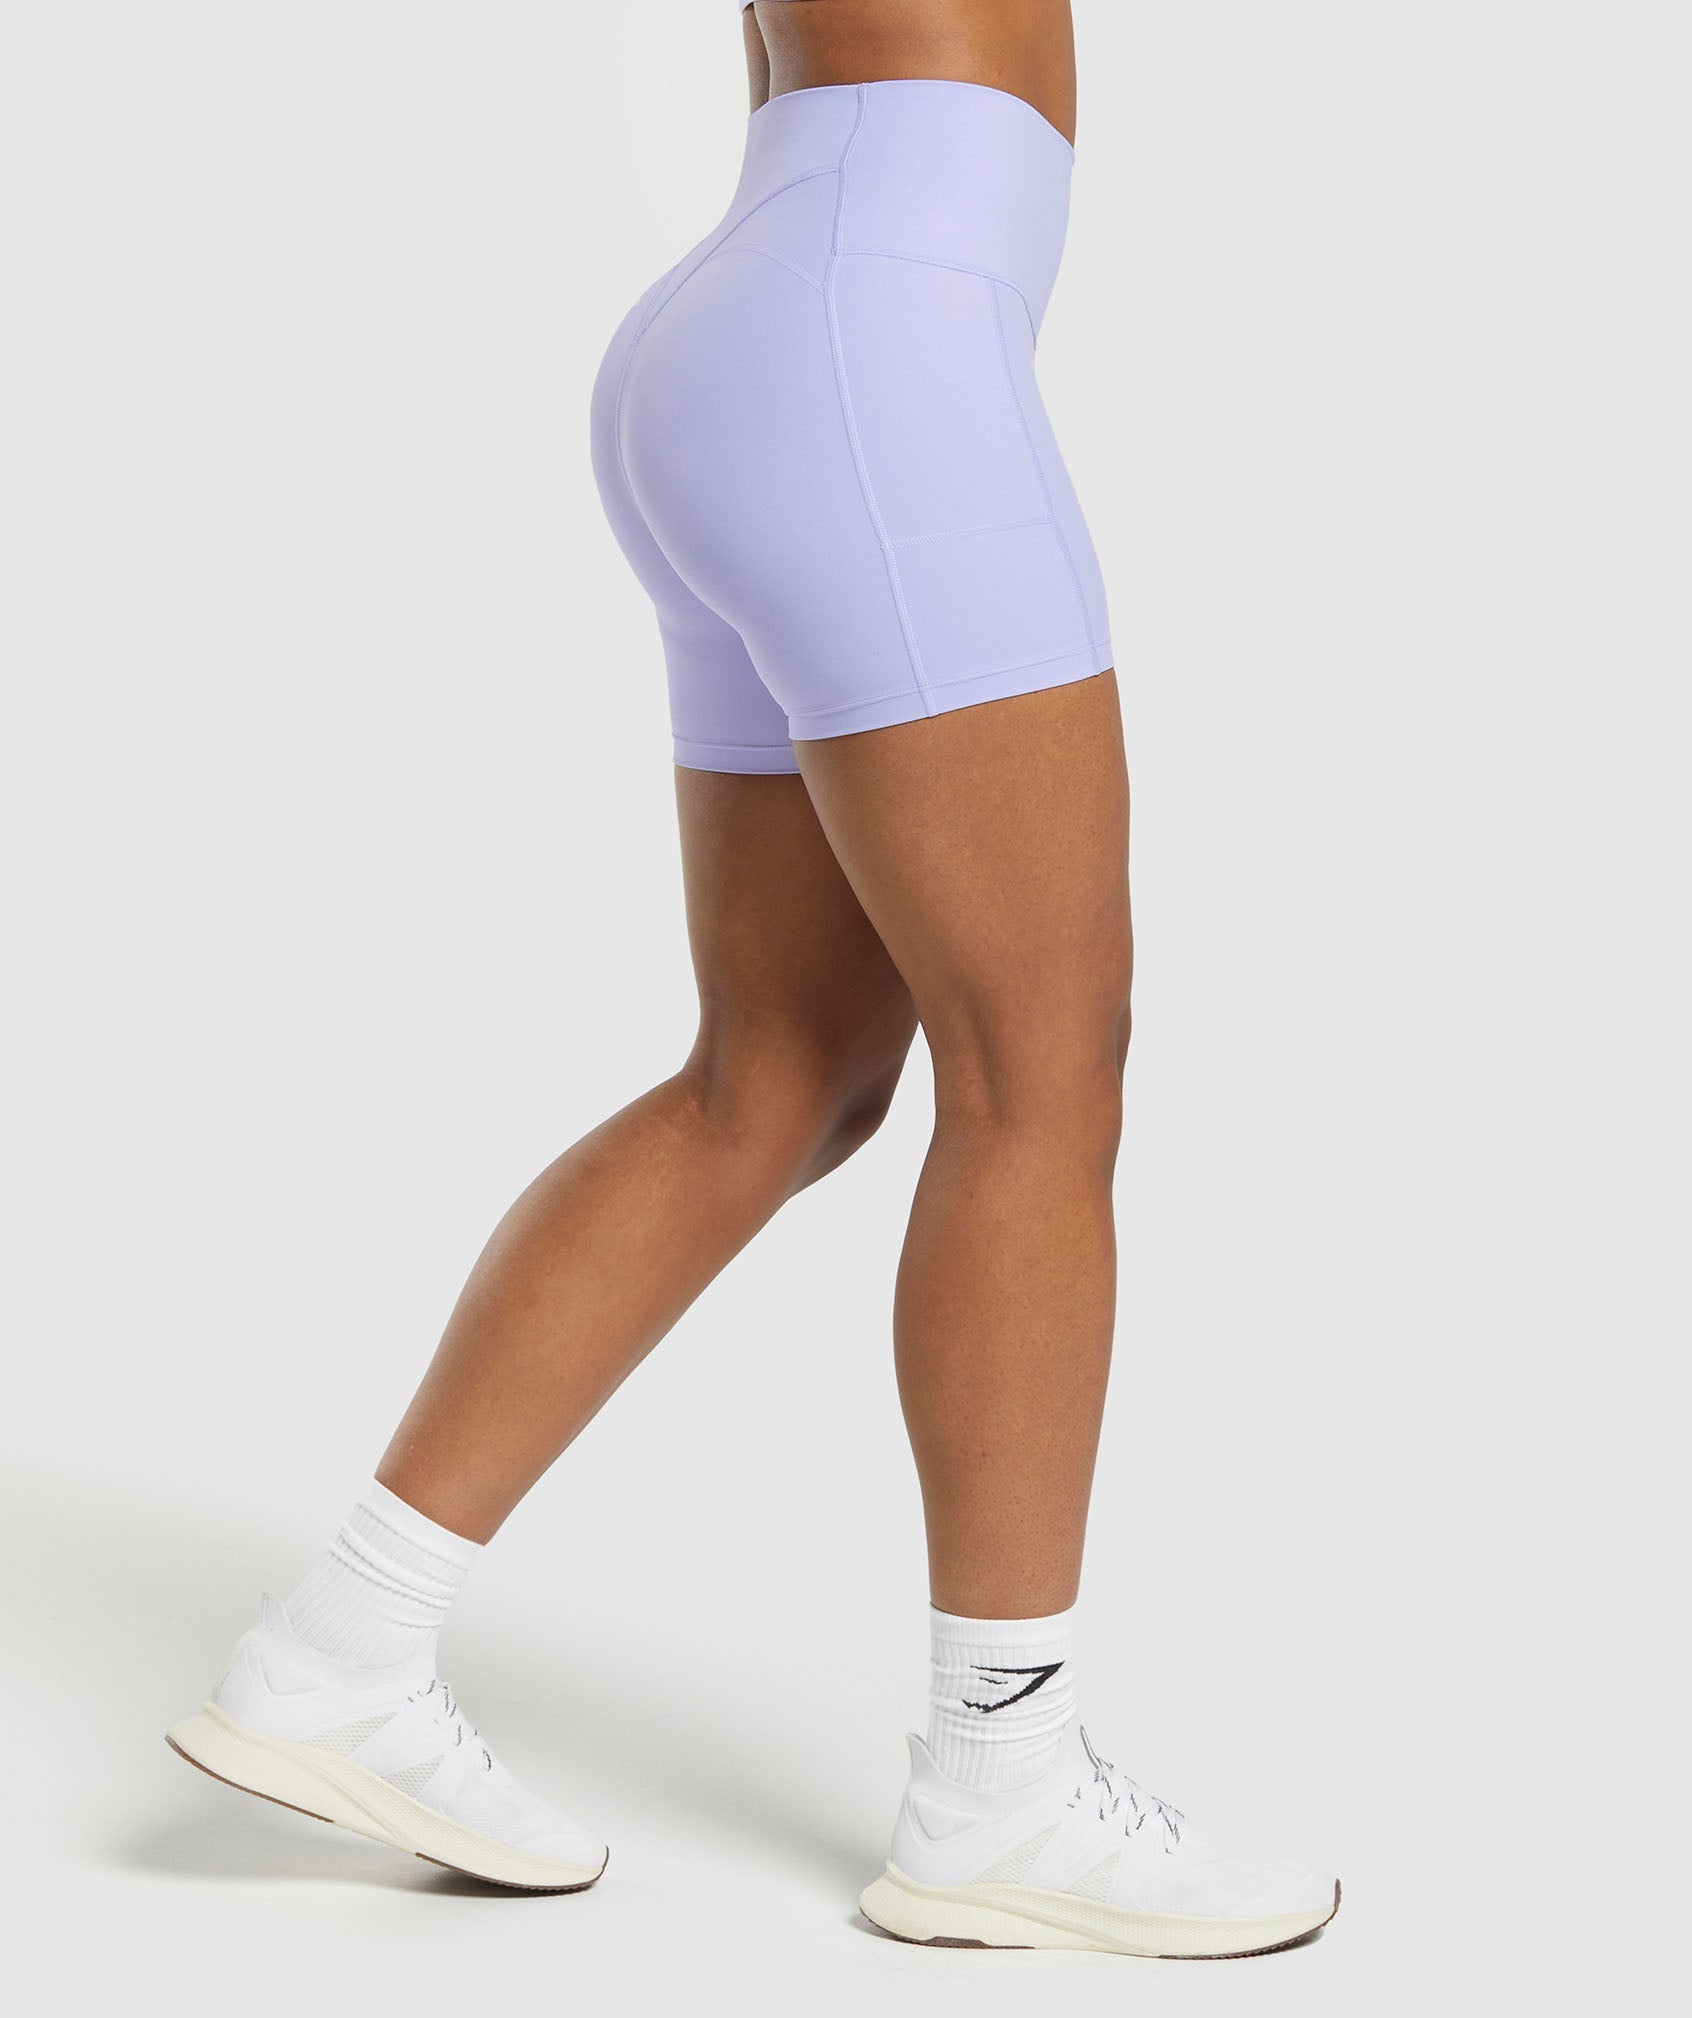 GS x Libby Shorts in Powdered Lilac - view 3